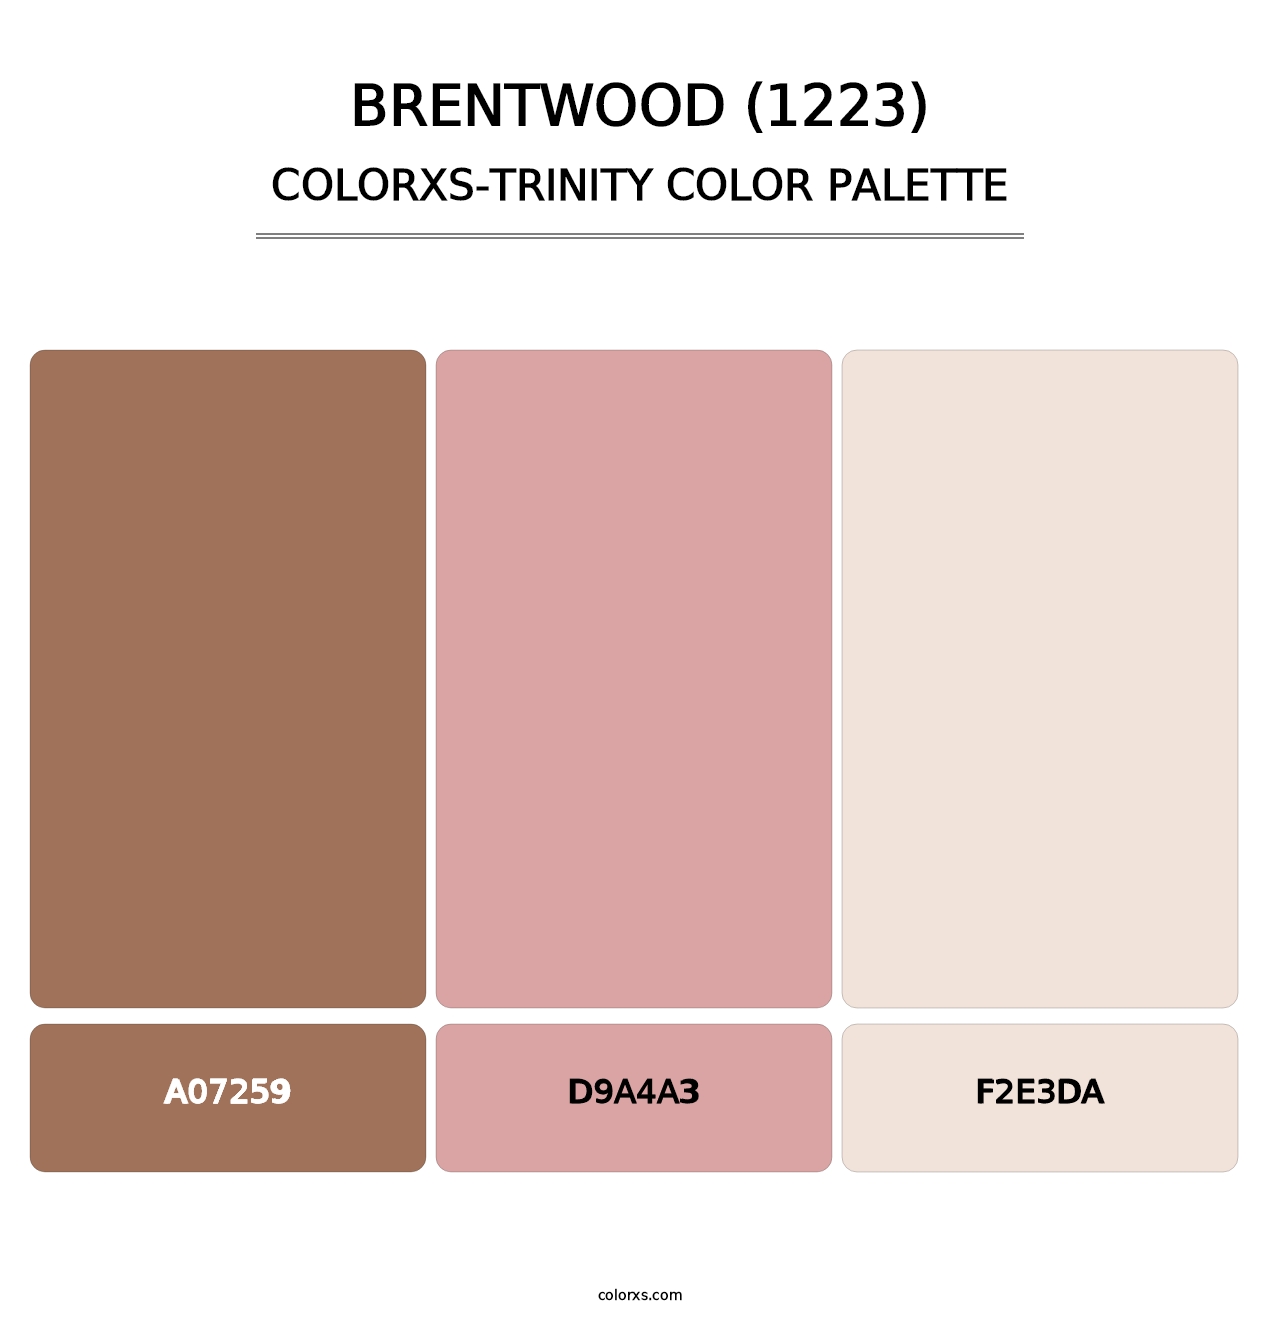 Brentwood (1223) - Colorxs Trinity Palette